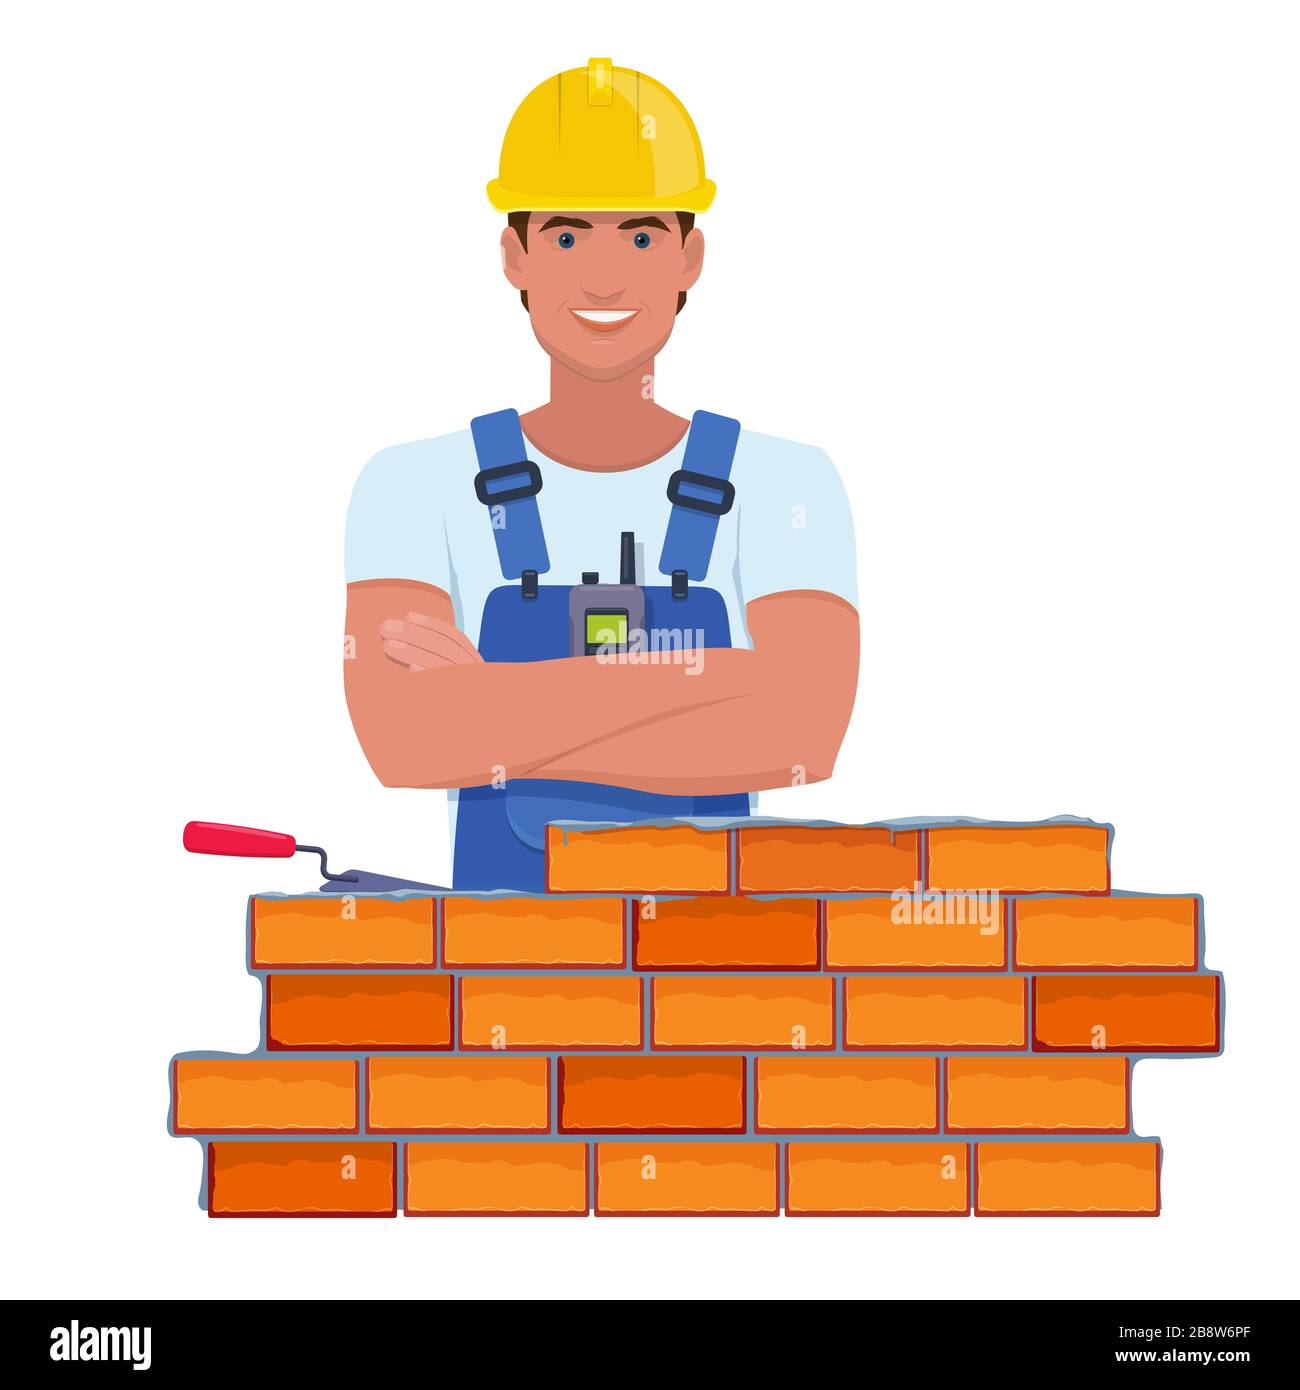 Illustration of professional builder with arms crossed Stock Vector